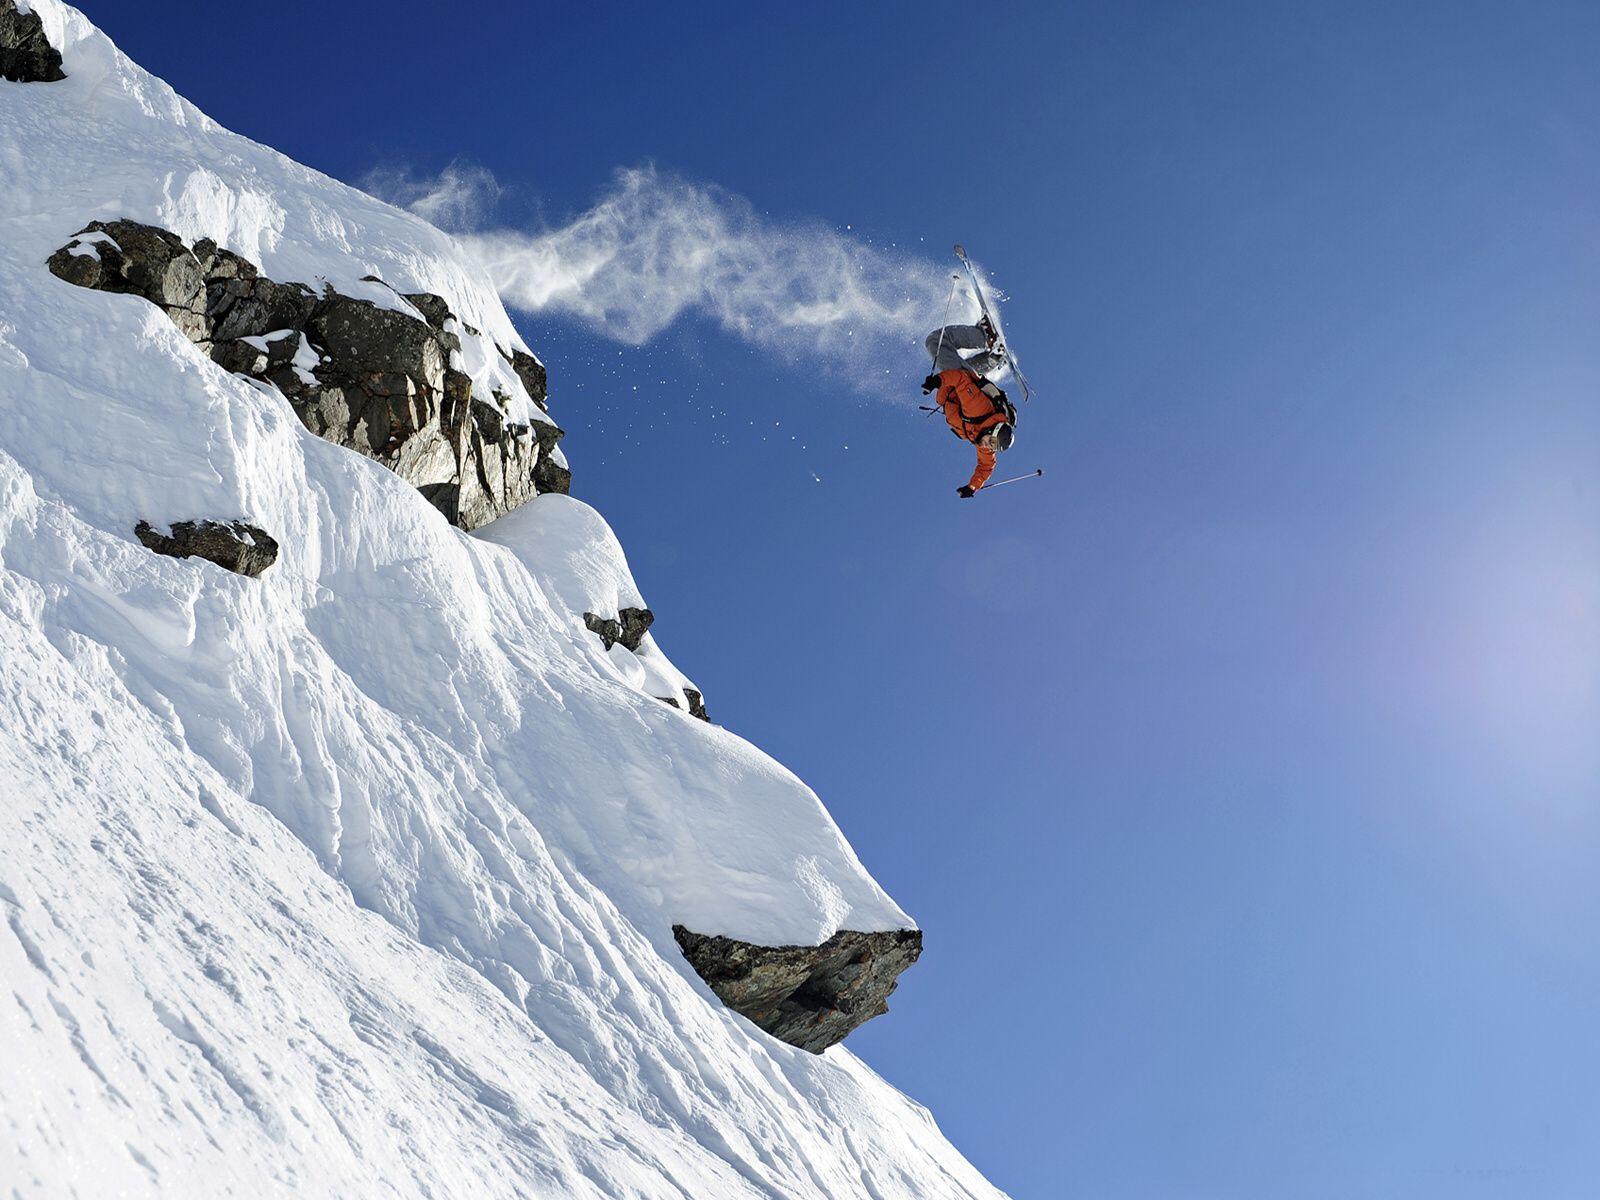 Trick Skiing Wallpapers - Top Free Trick Skiing Backgrounds ...